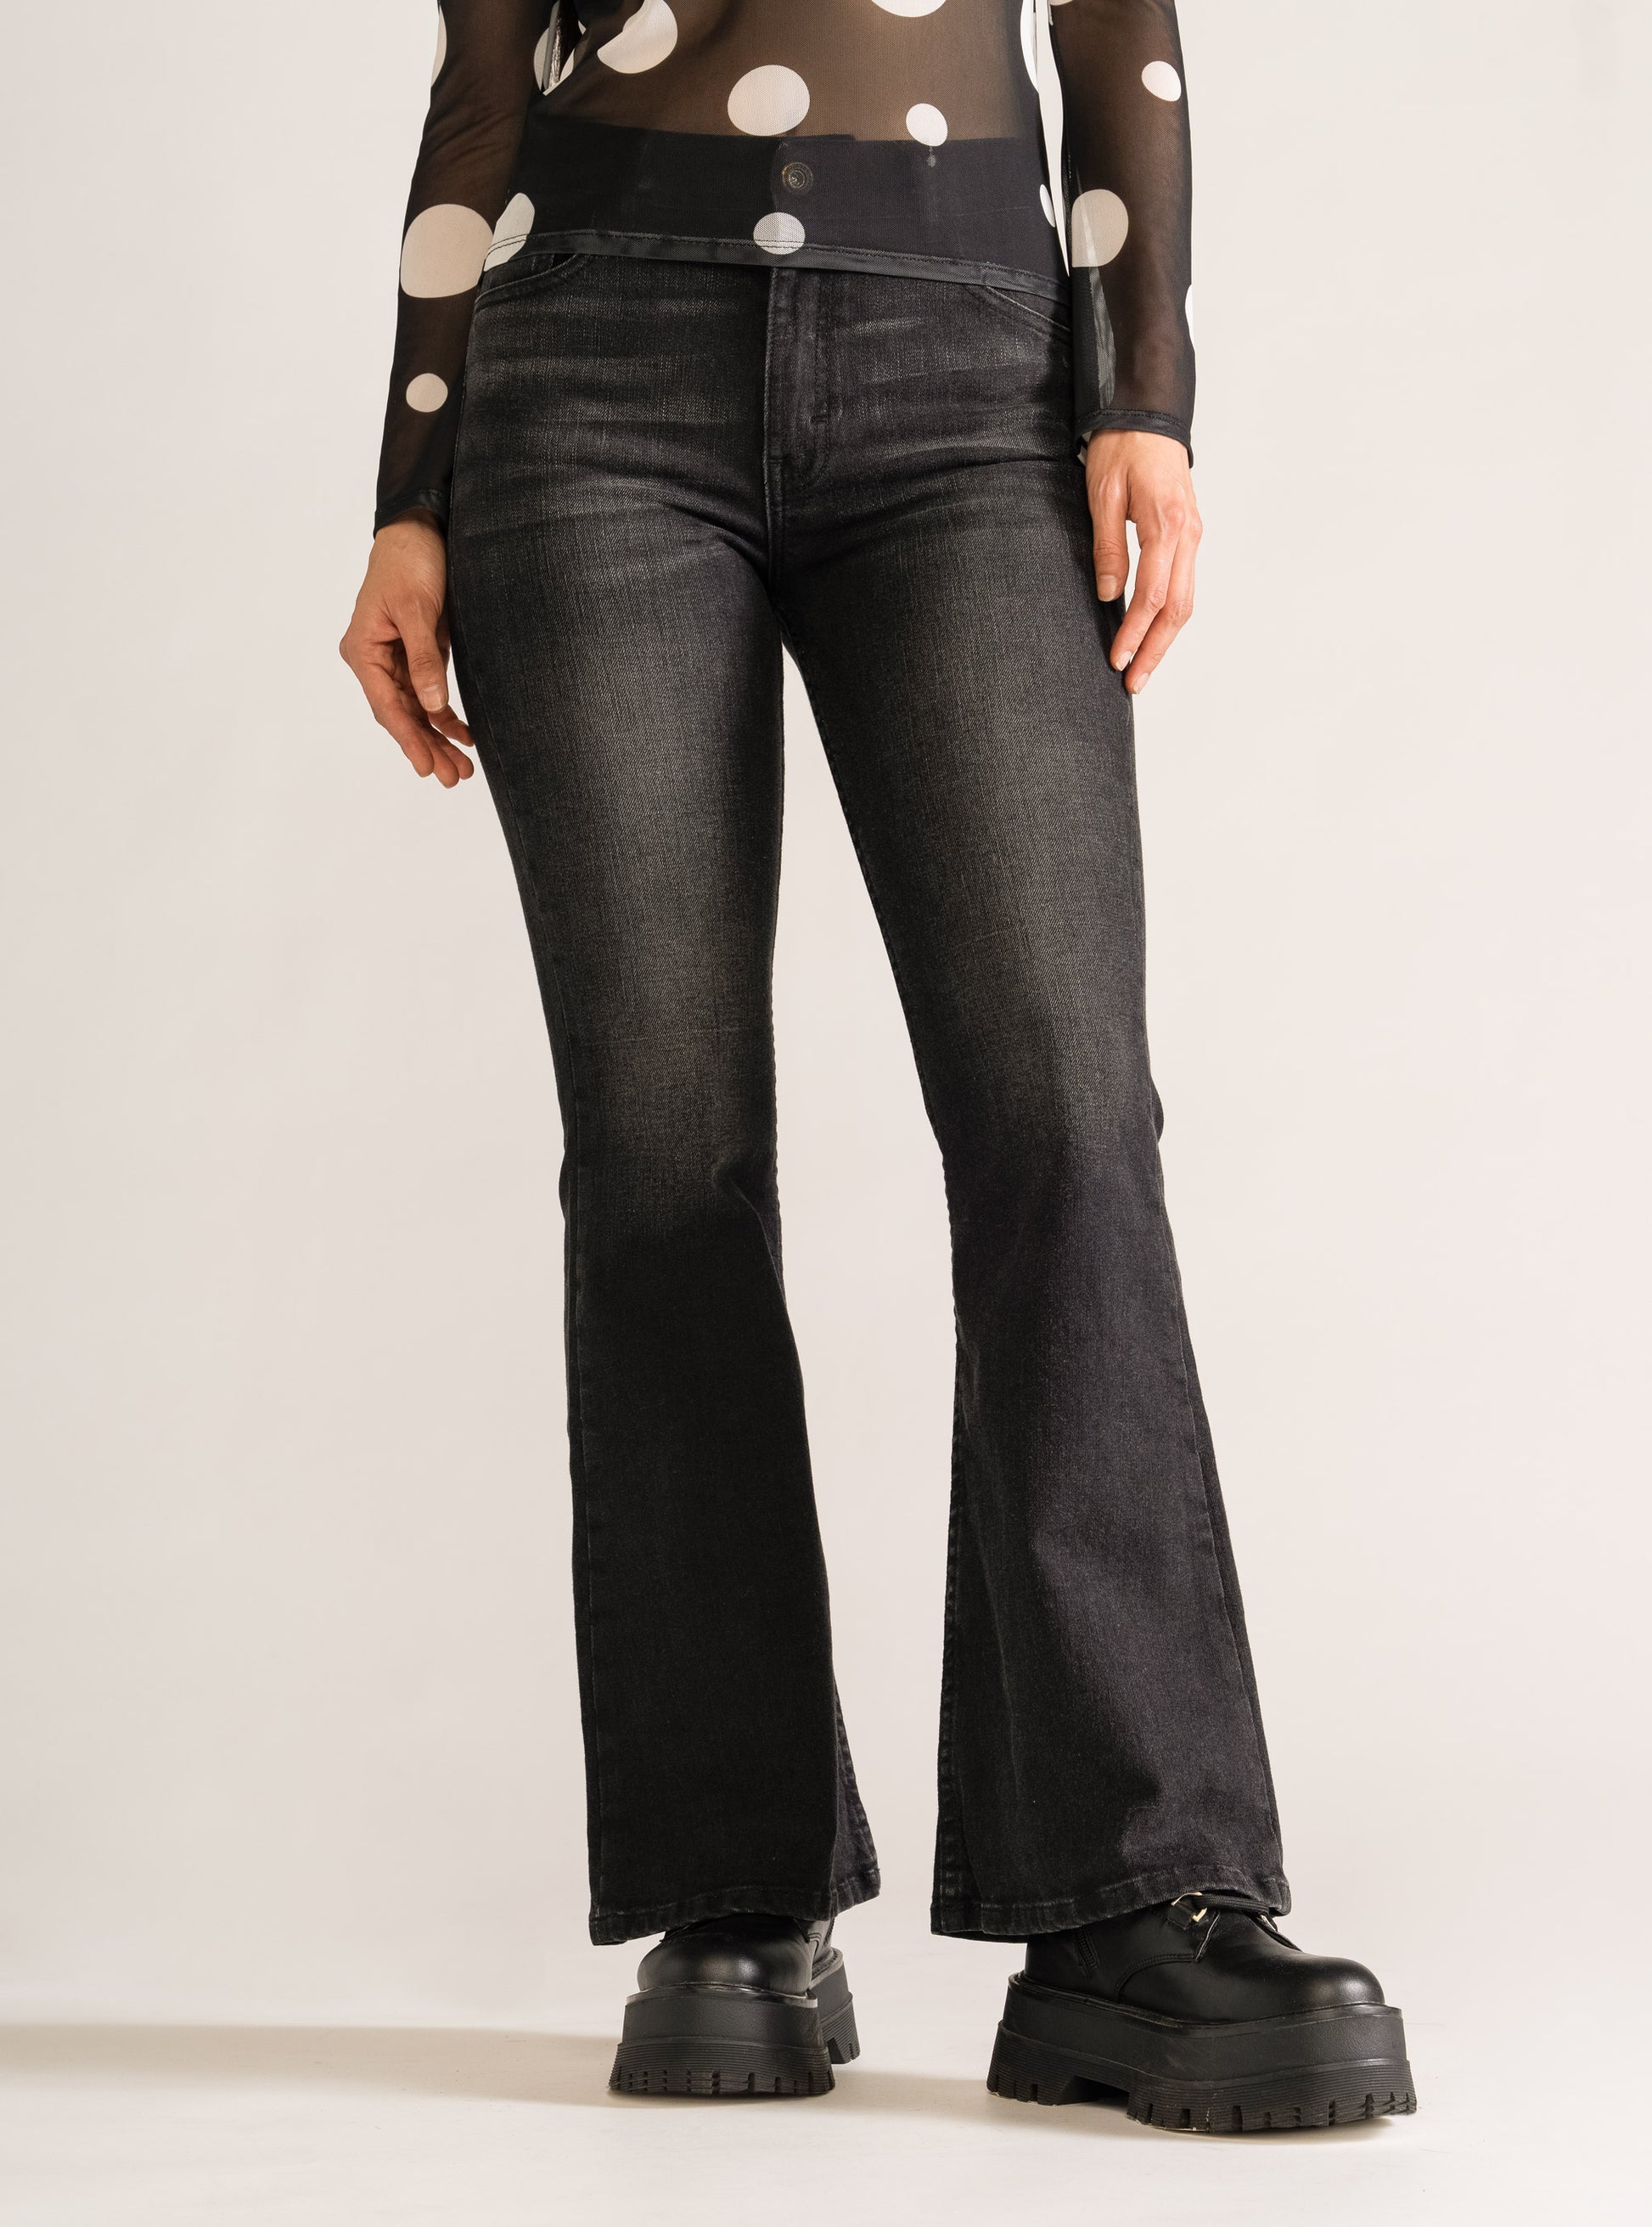 Jeans Desires Talla 31, Mujer